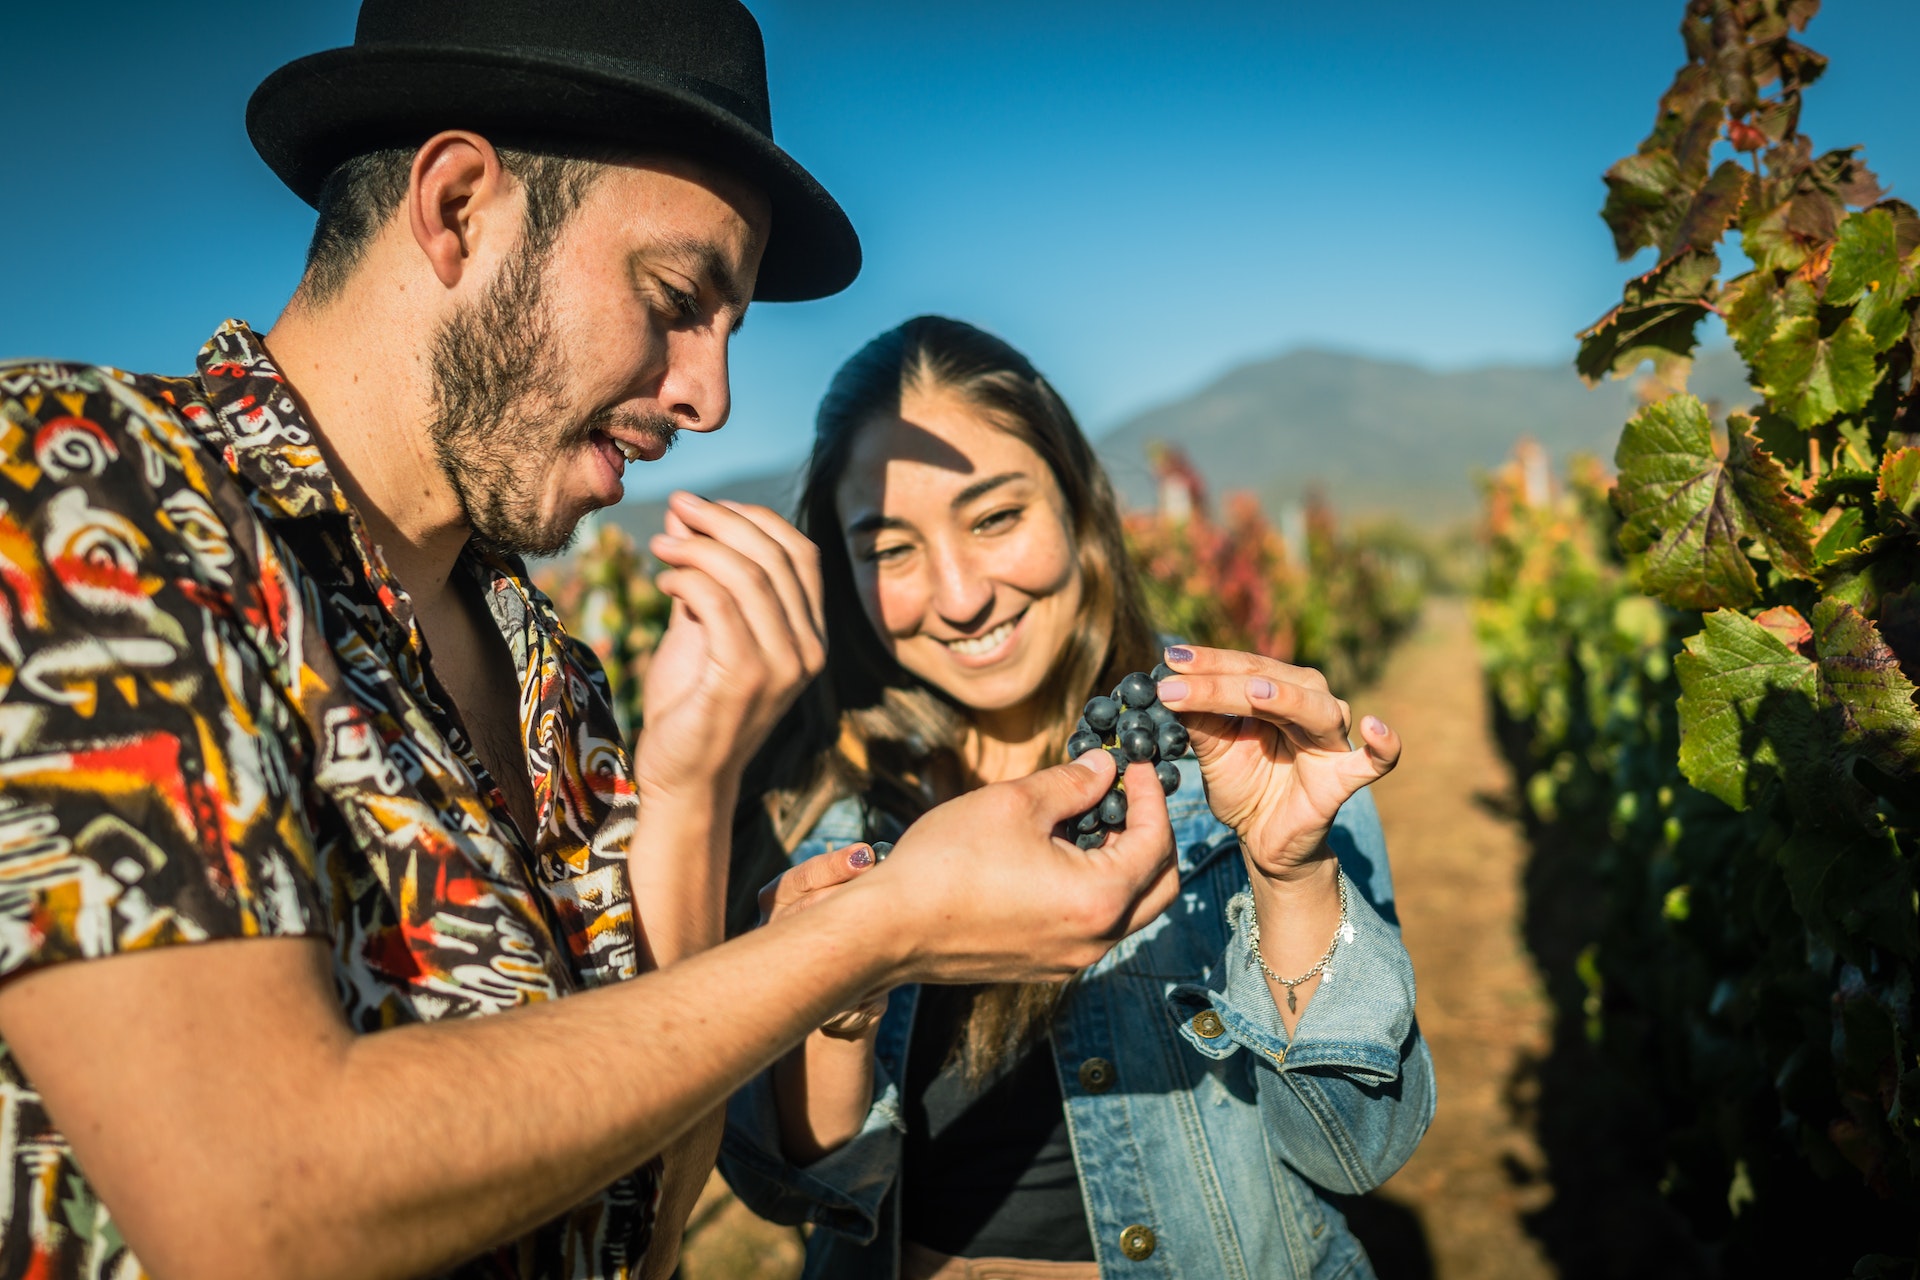 Man and woman share grapes in a vineyard